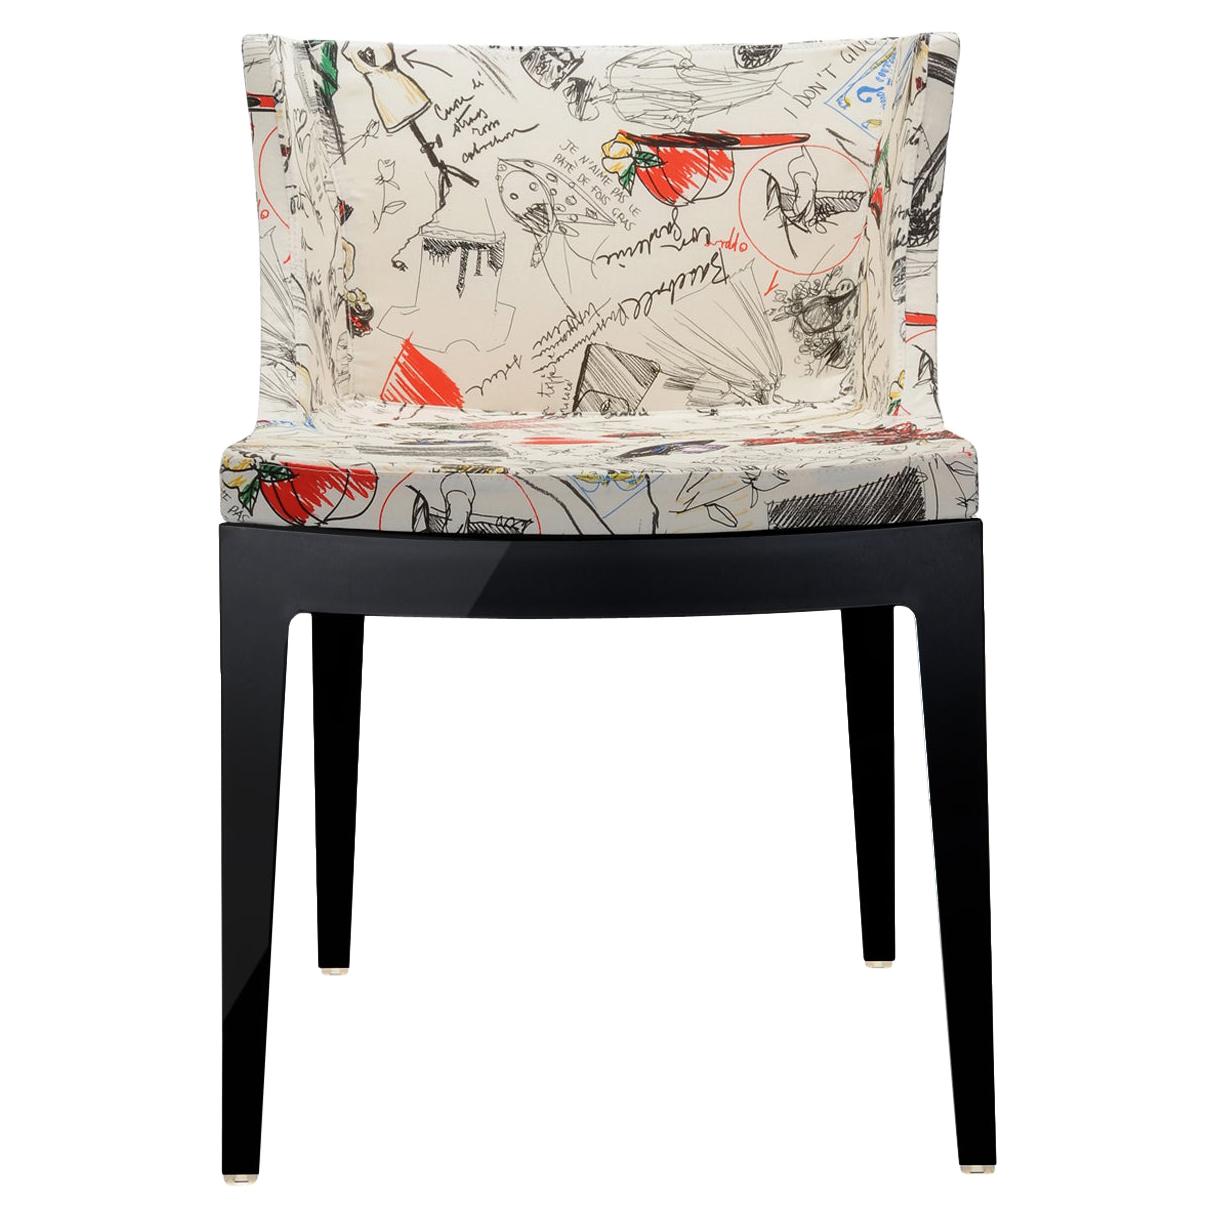 Kartell Mademoiselle "A La Mode" Moschino Sketches Chair by Philippe Starck